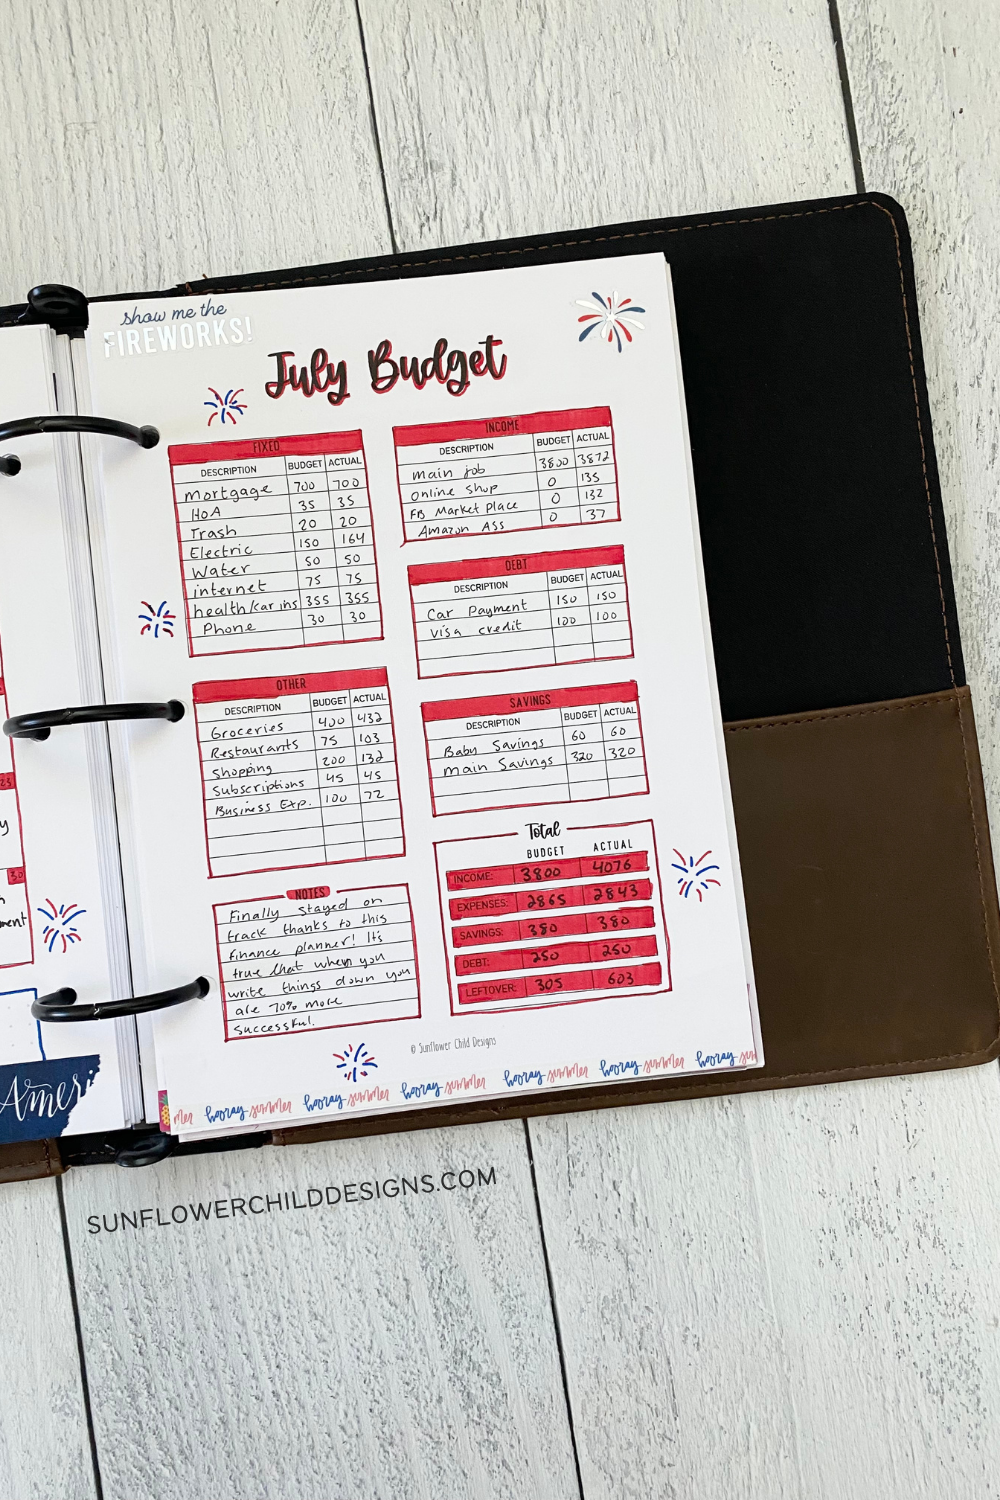 July Monthly Budget Page from the Finance Planner